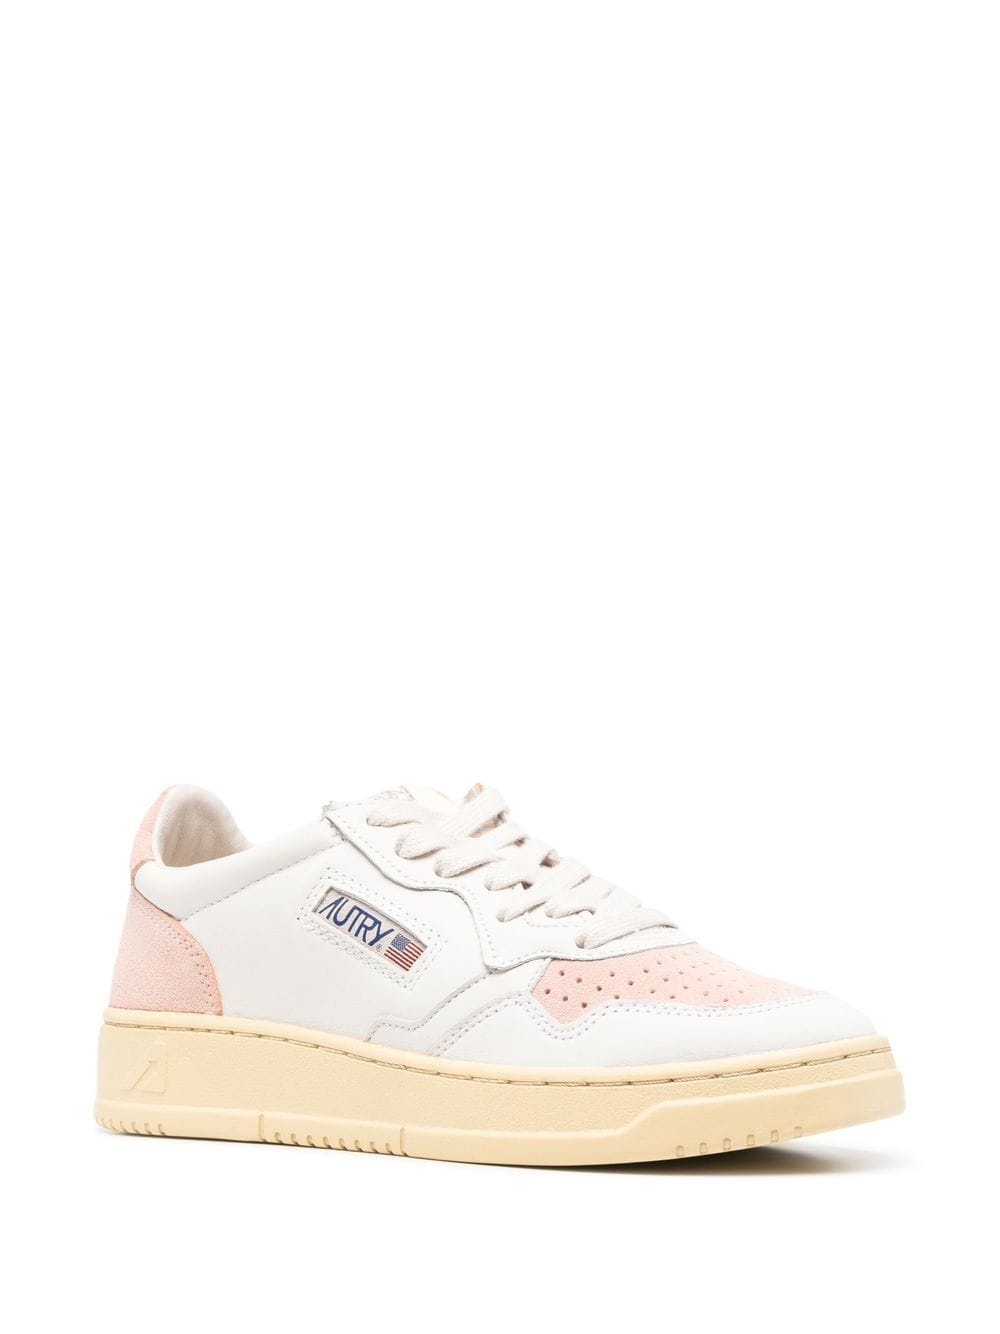 Perforated pink details low-top sneakers